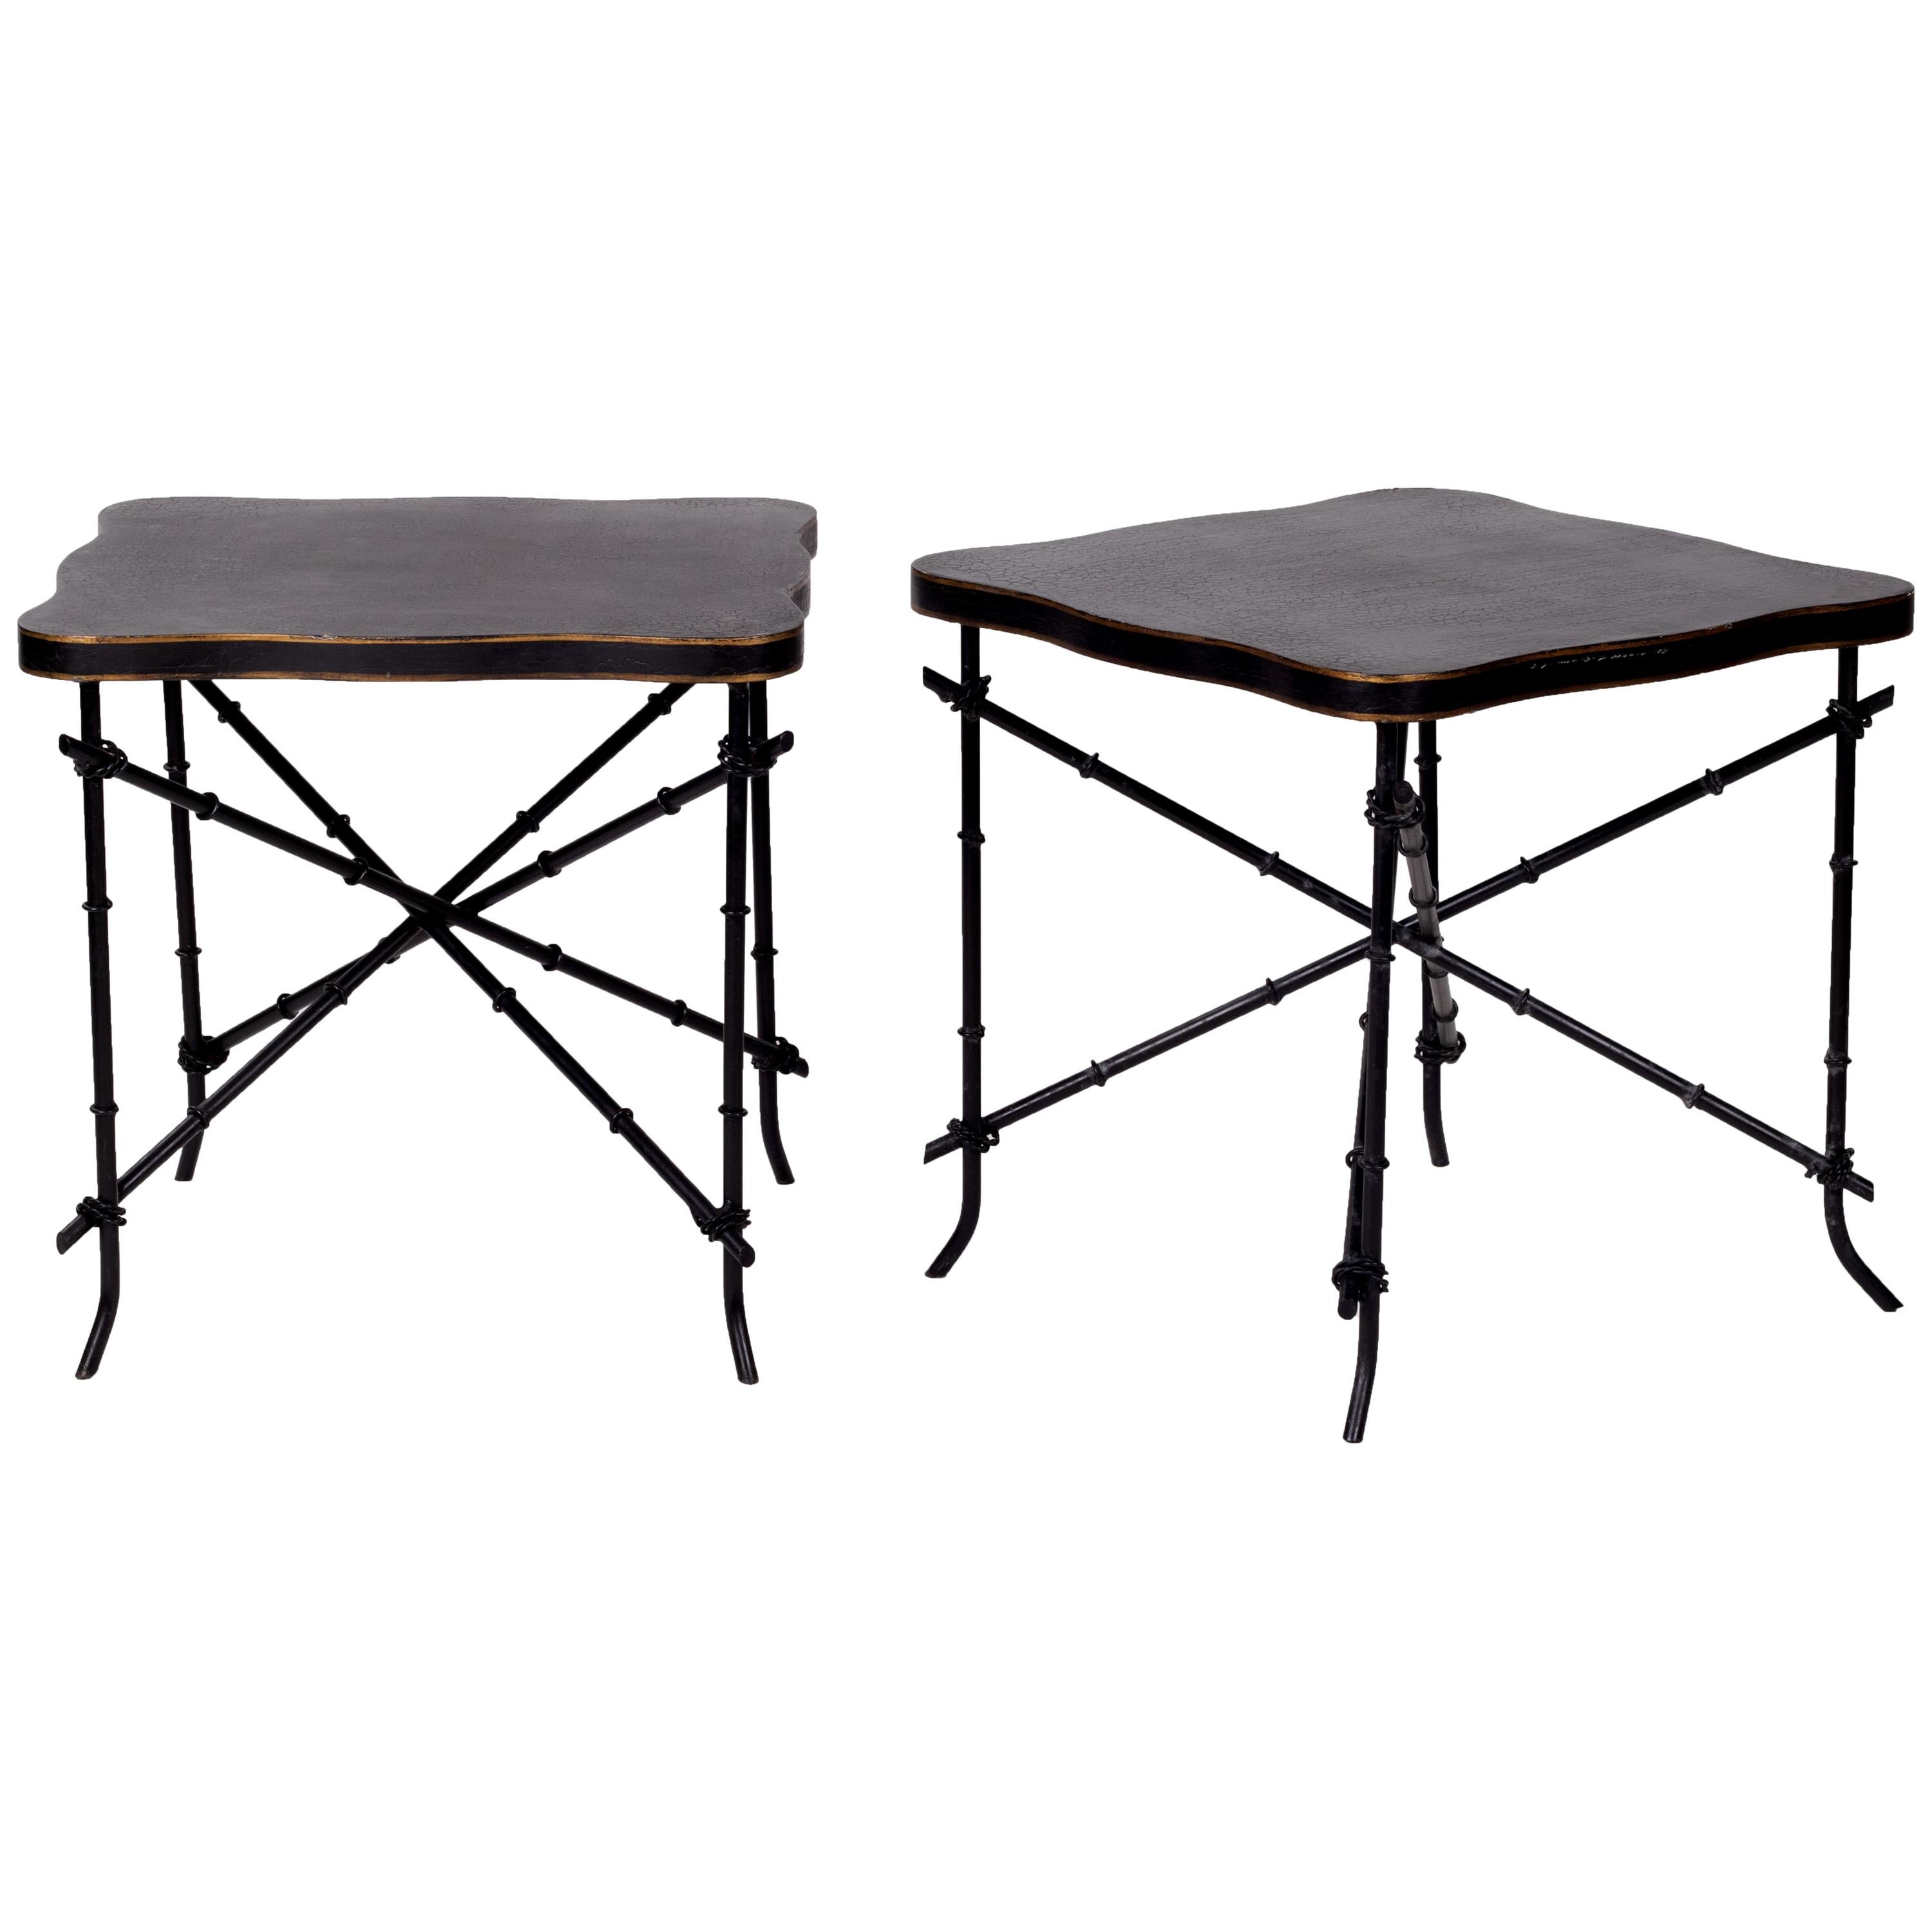 1990s French Pair of Iron Base and Wooden Top Black Side Tables